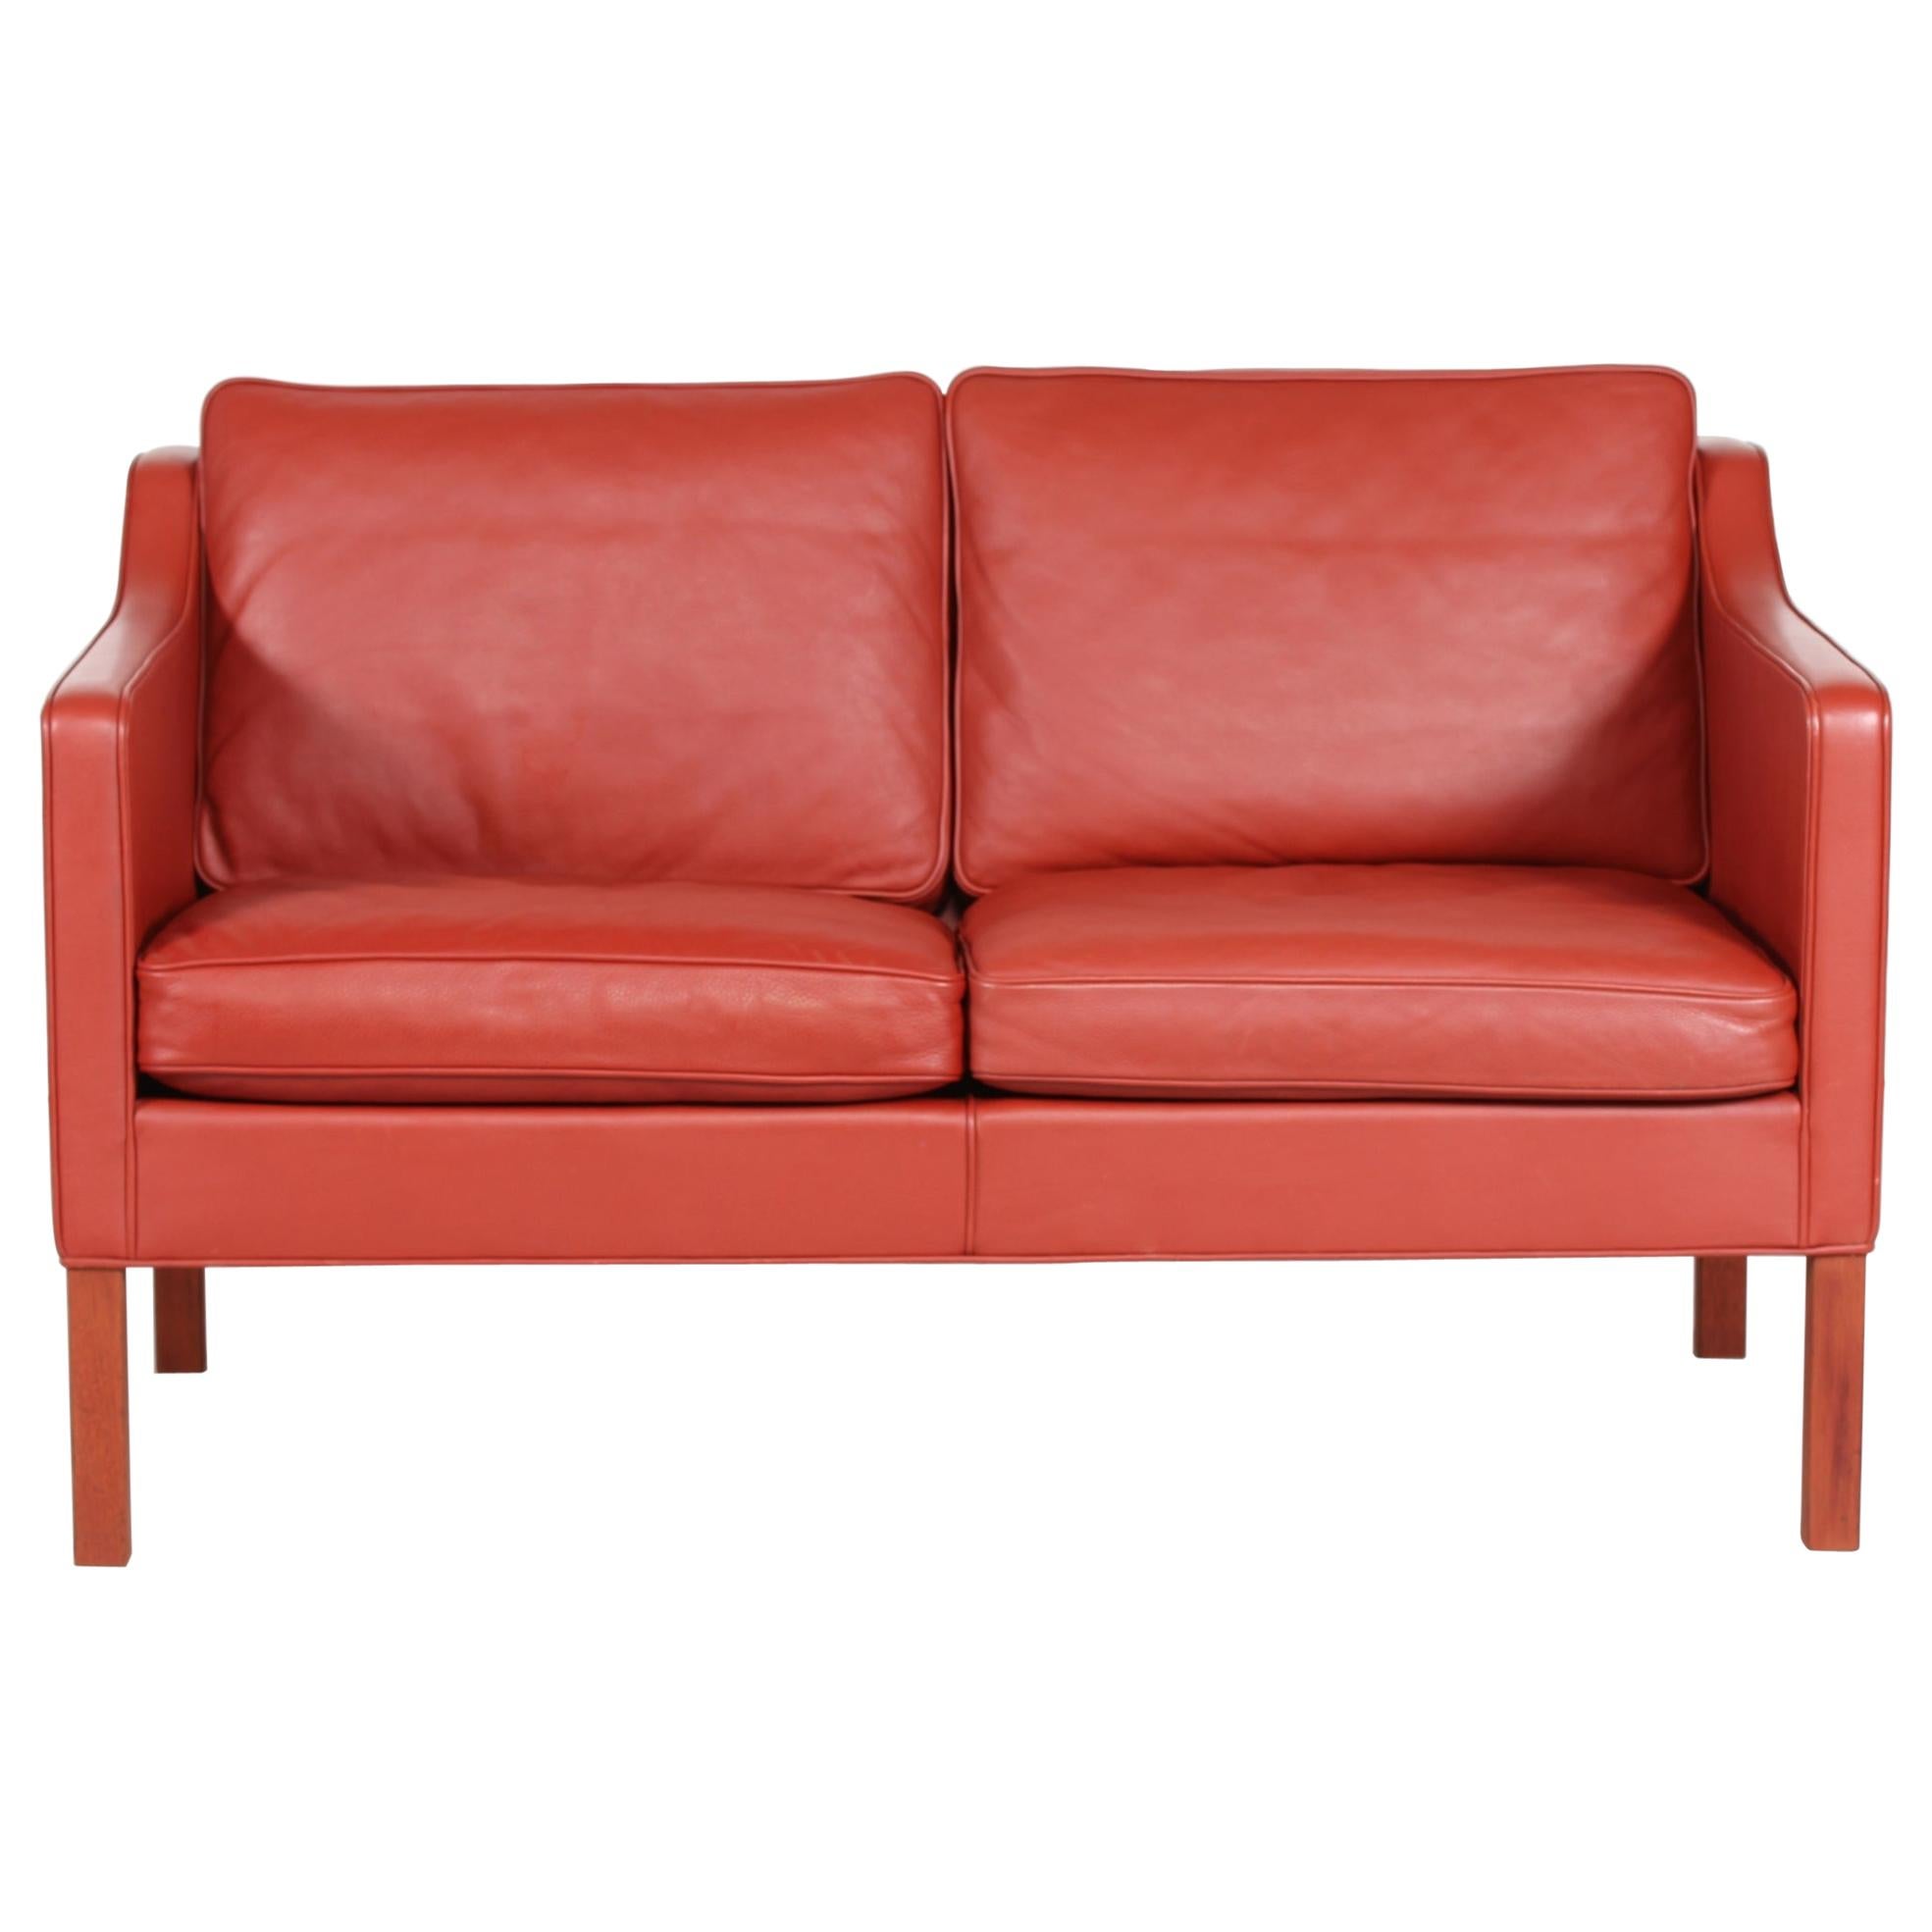 Børge Mogensen Sofa 2322 with Red Brown Leather by Fredericia Furniture, 1995 For Sale